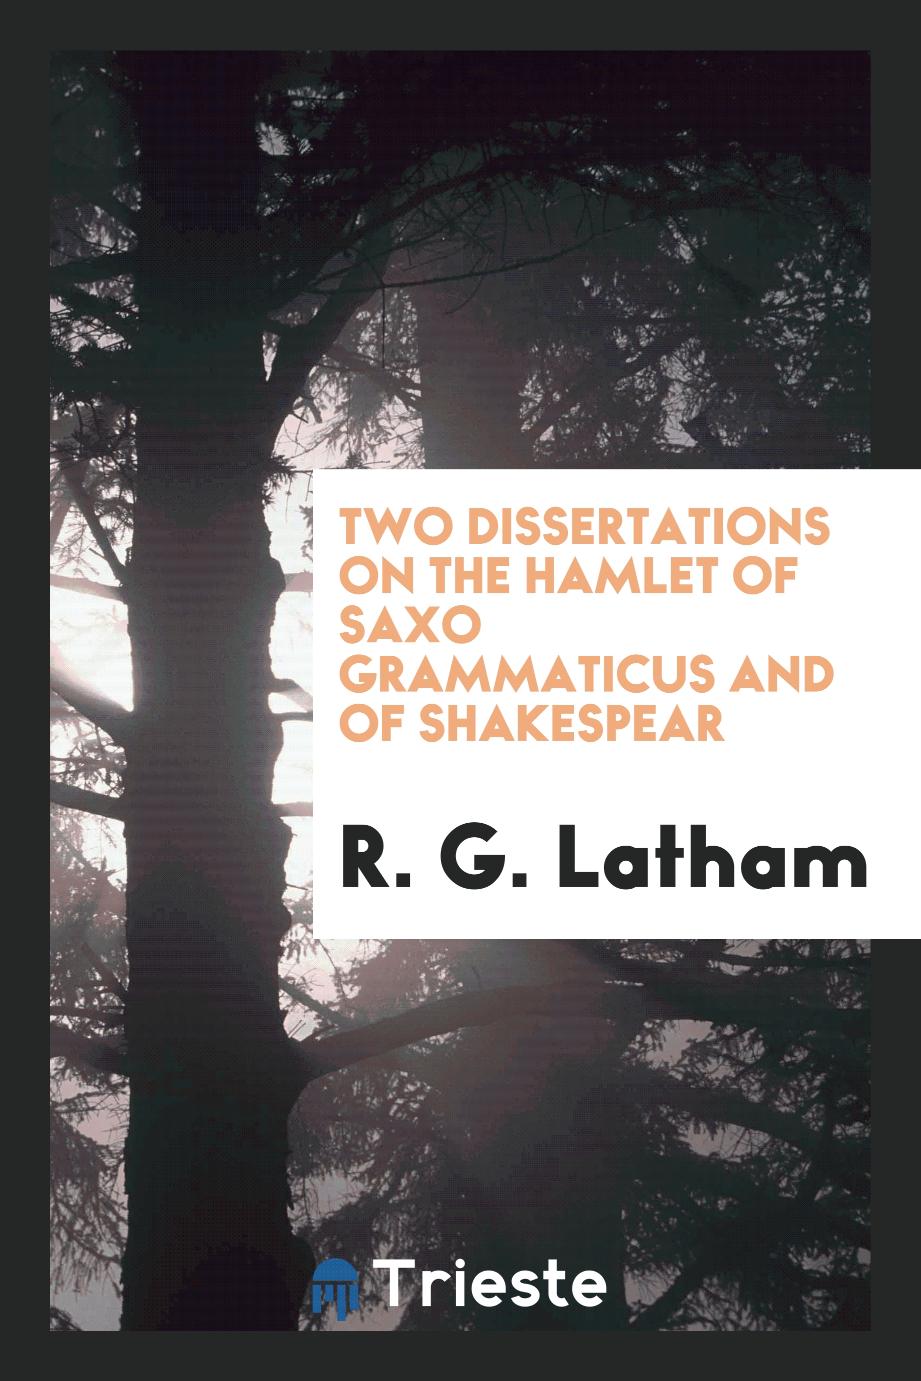 Two dissertations on the Hamlet of Saxo Grammaticus and of Shakespear